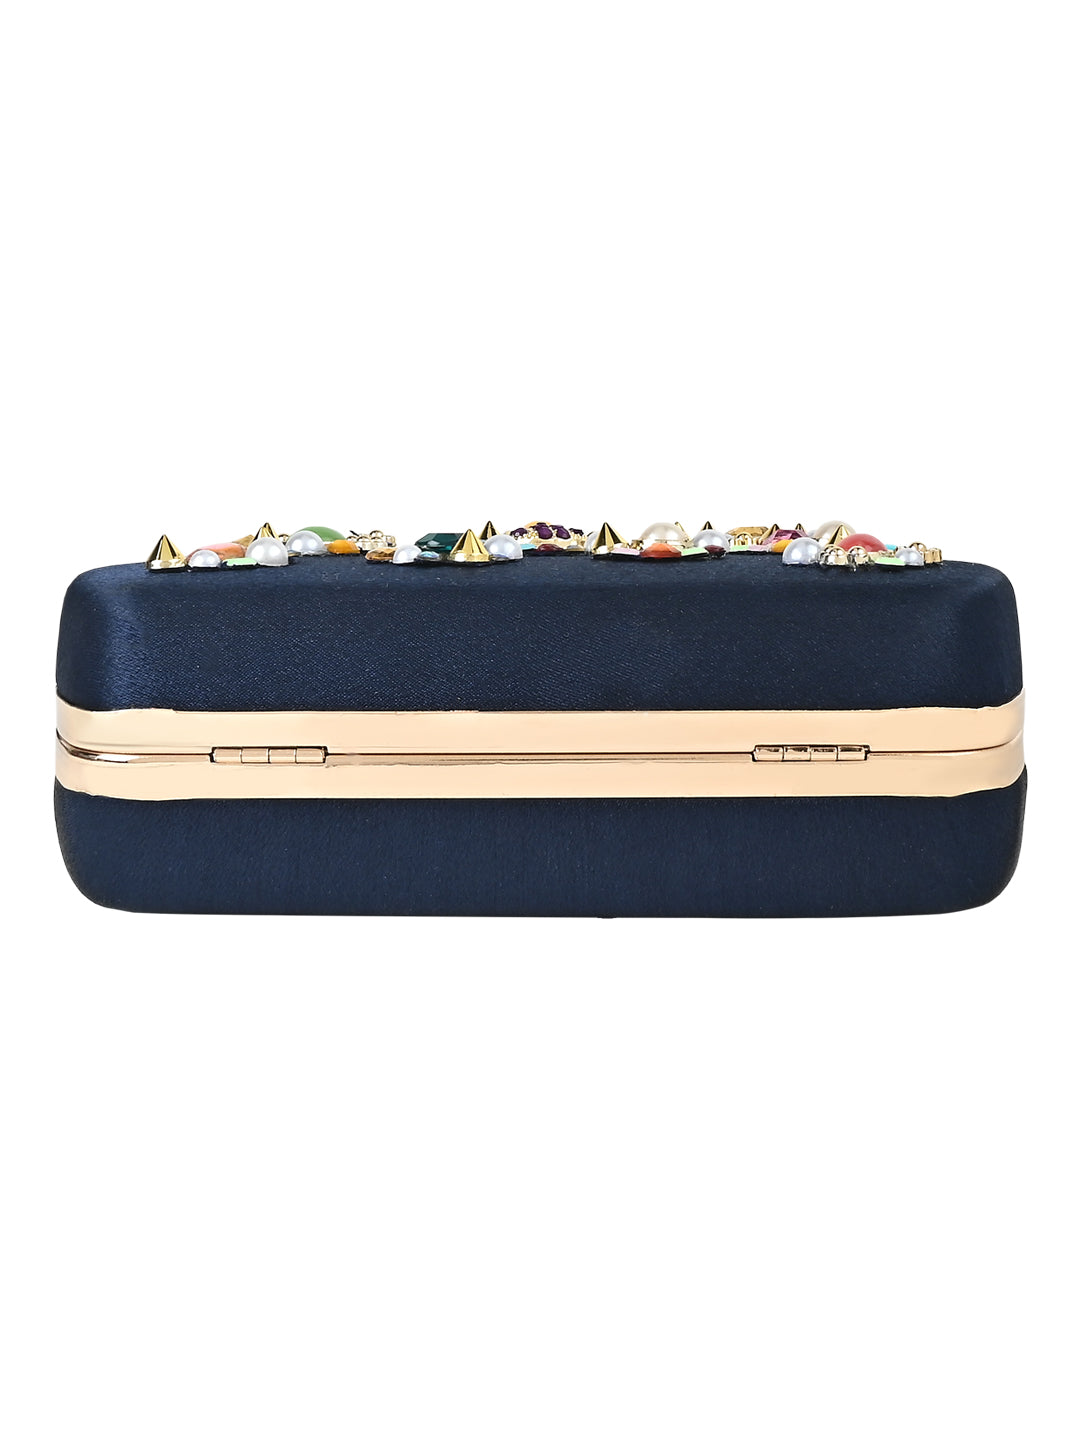 A Vdesi clutch made from quality materials. 